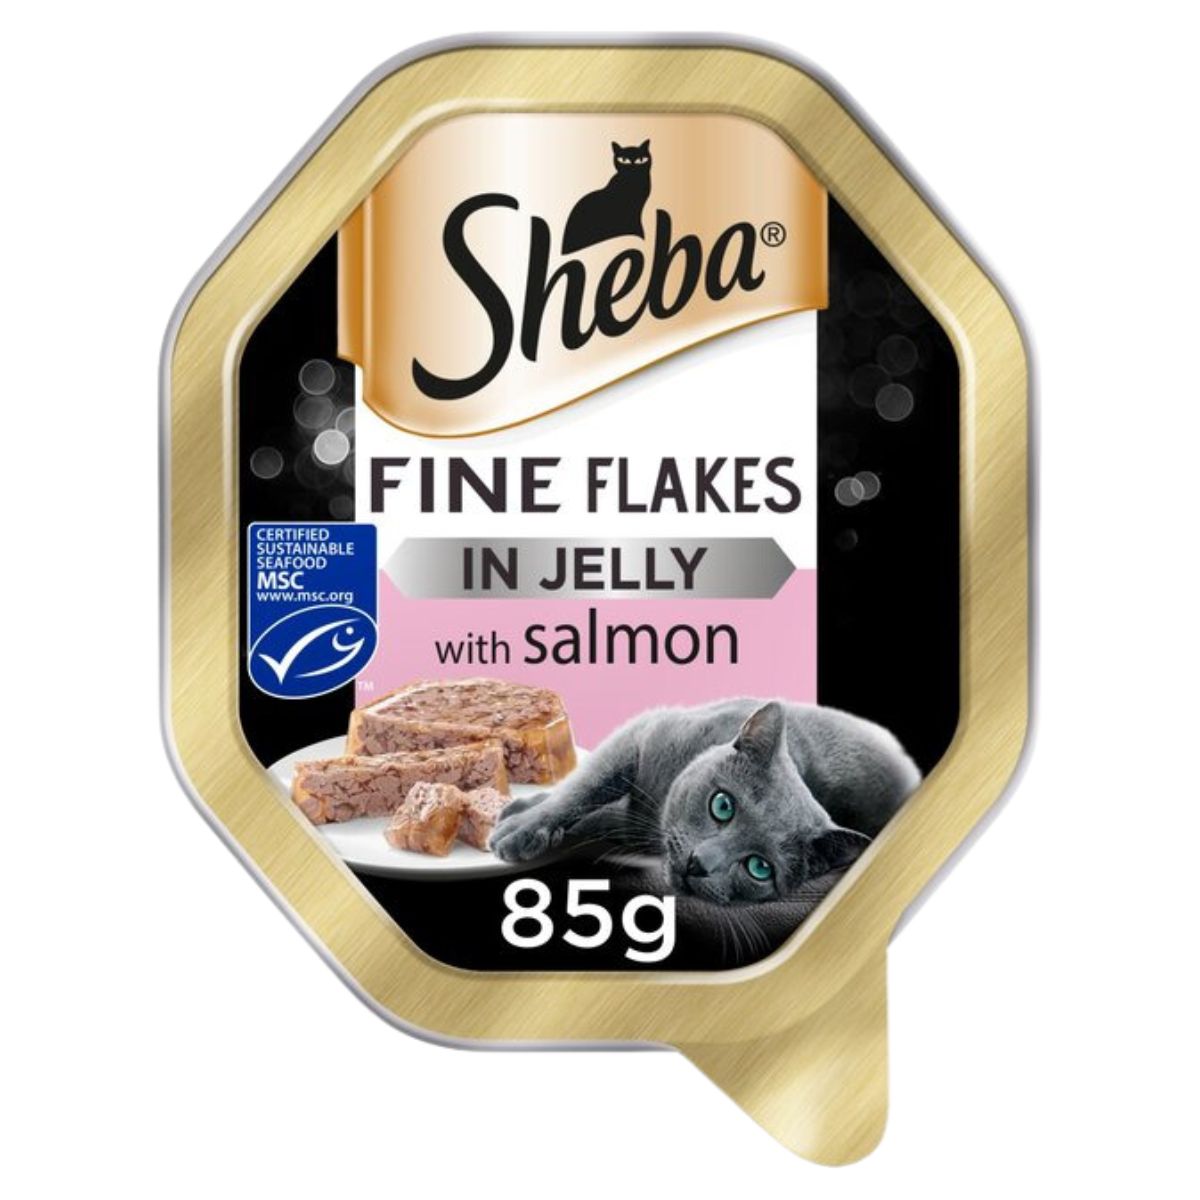 Sheba - Pieces Jelly Salmon Cat Food Tray - 85g fine flakes in jelly with salmon.